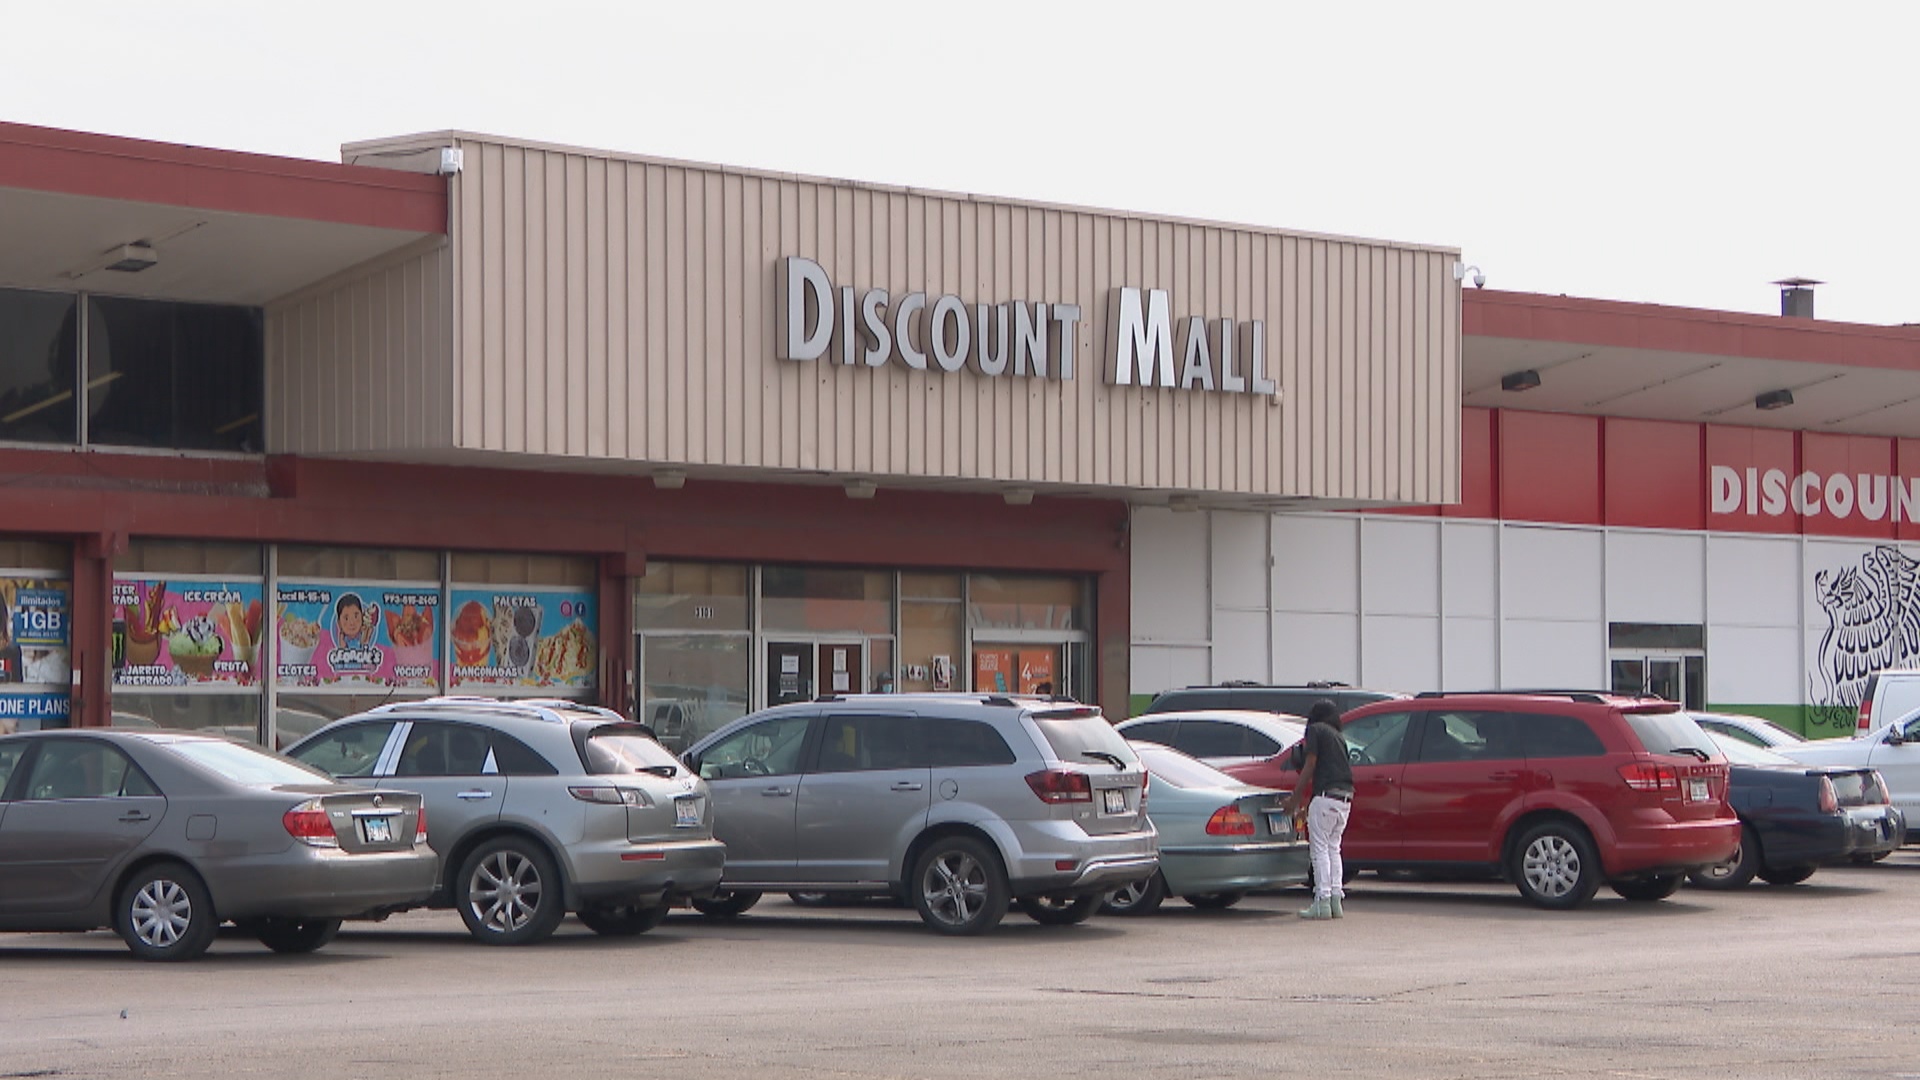 French Mall Owner Adds Big Retailers as Part of Overhaul Near Chicago